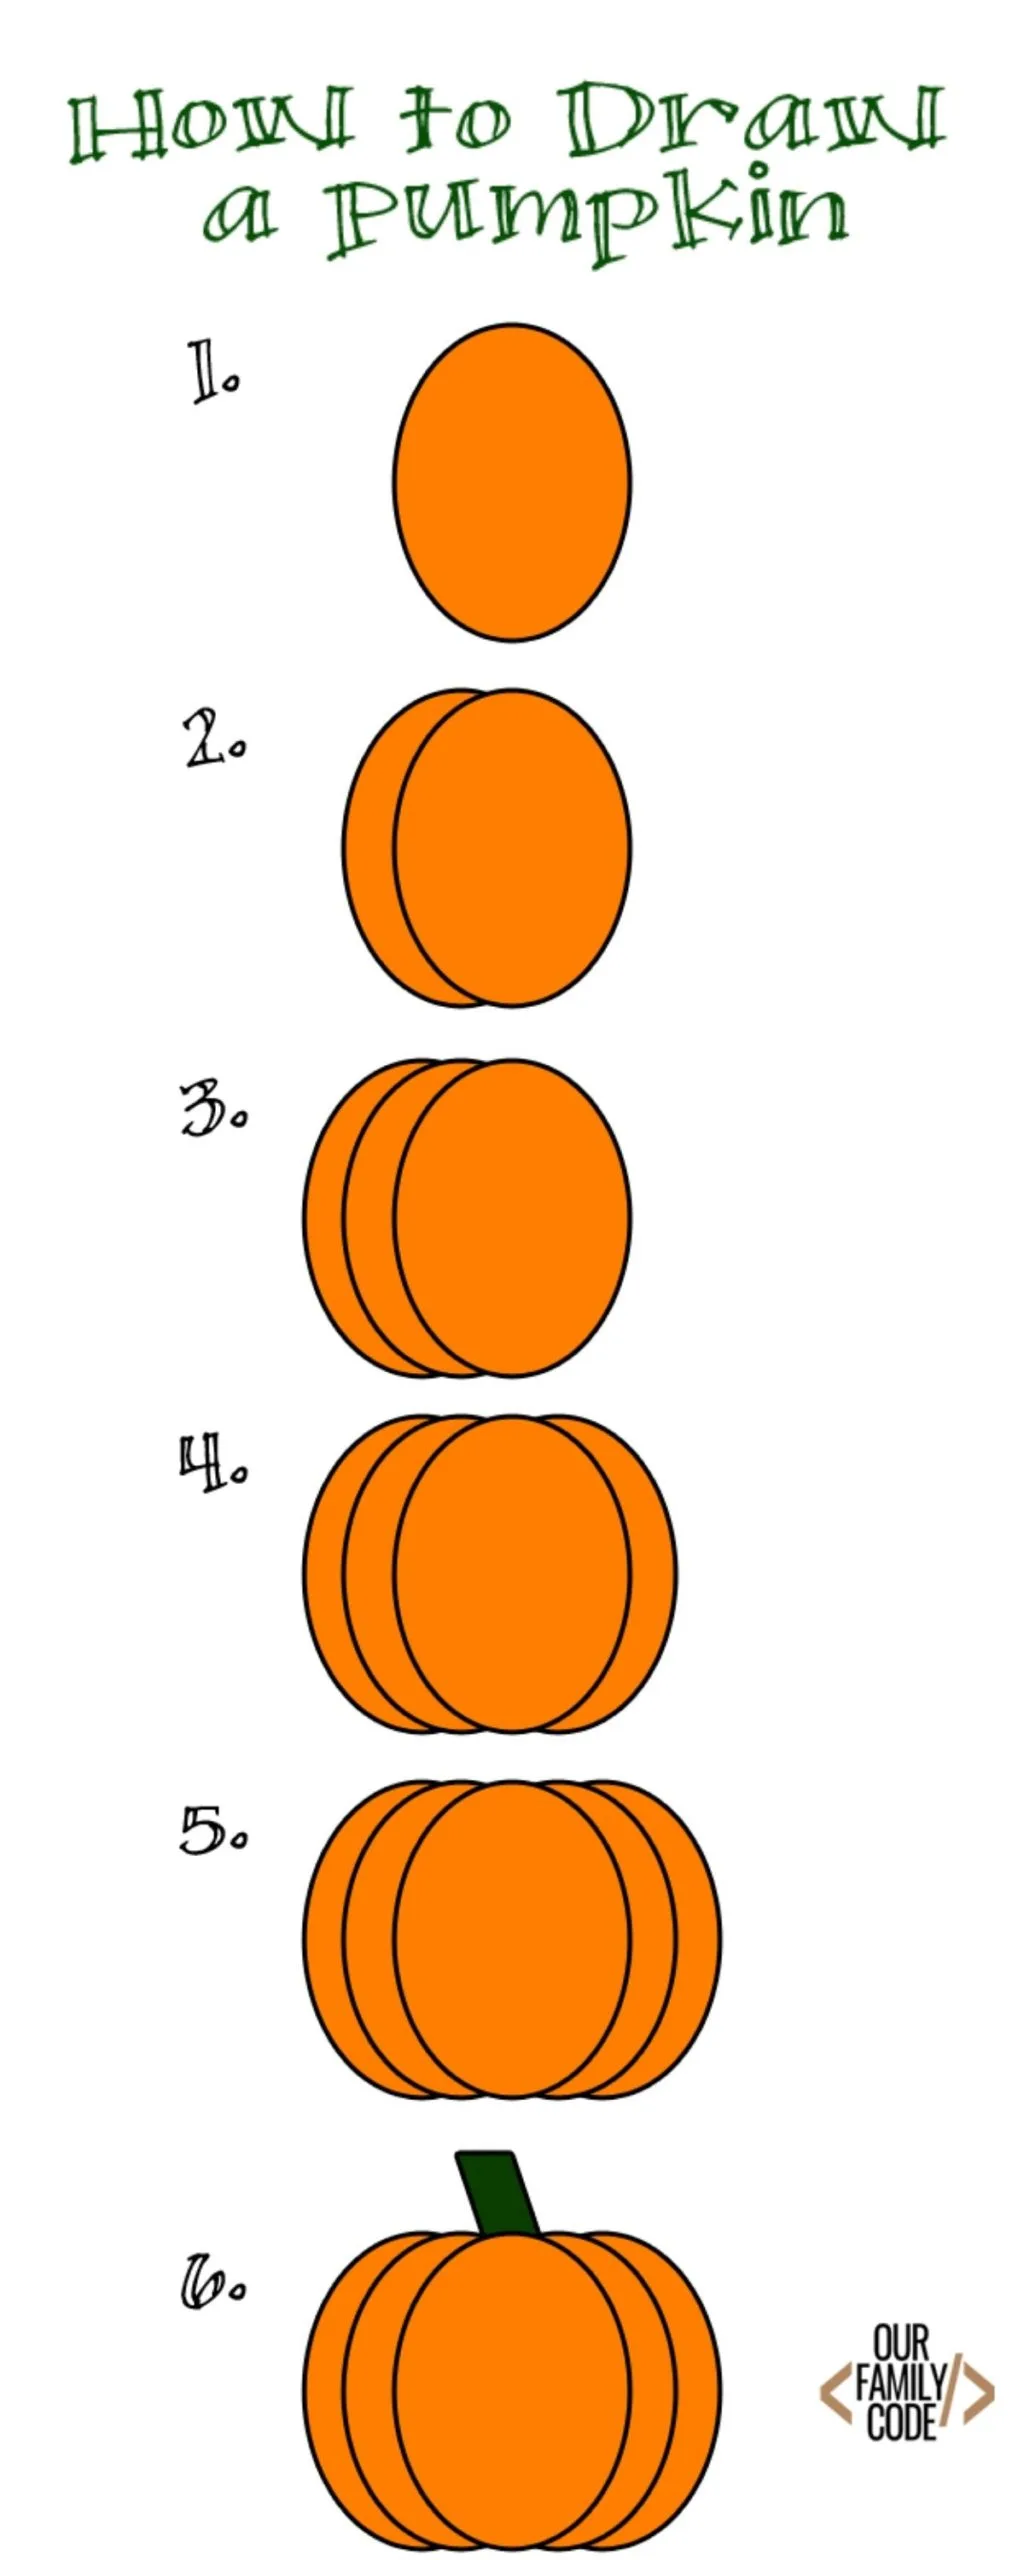 How to Draw a Pumpkin infographic